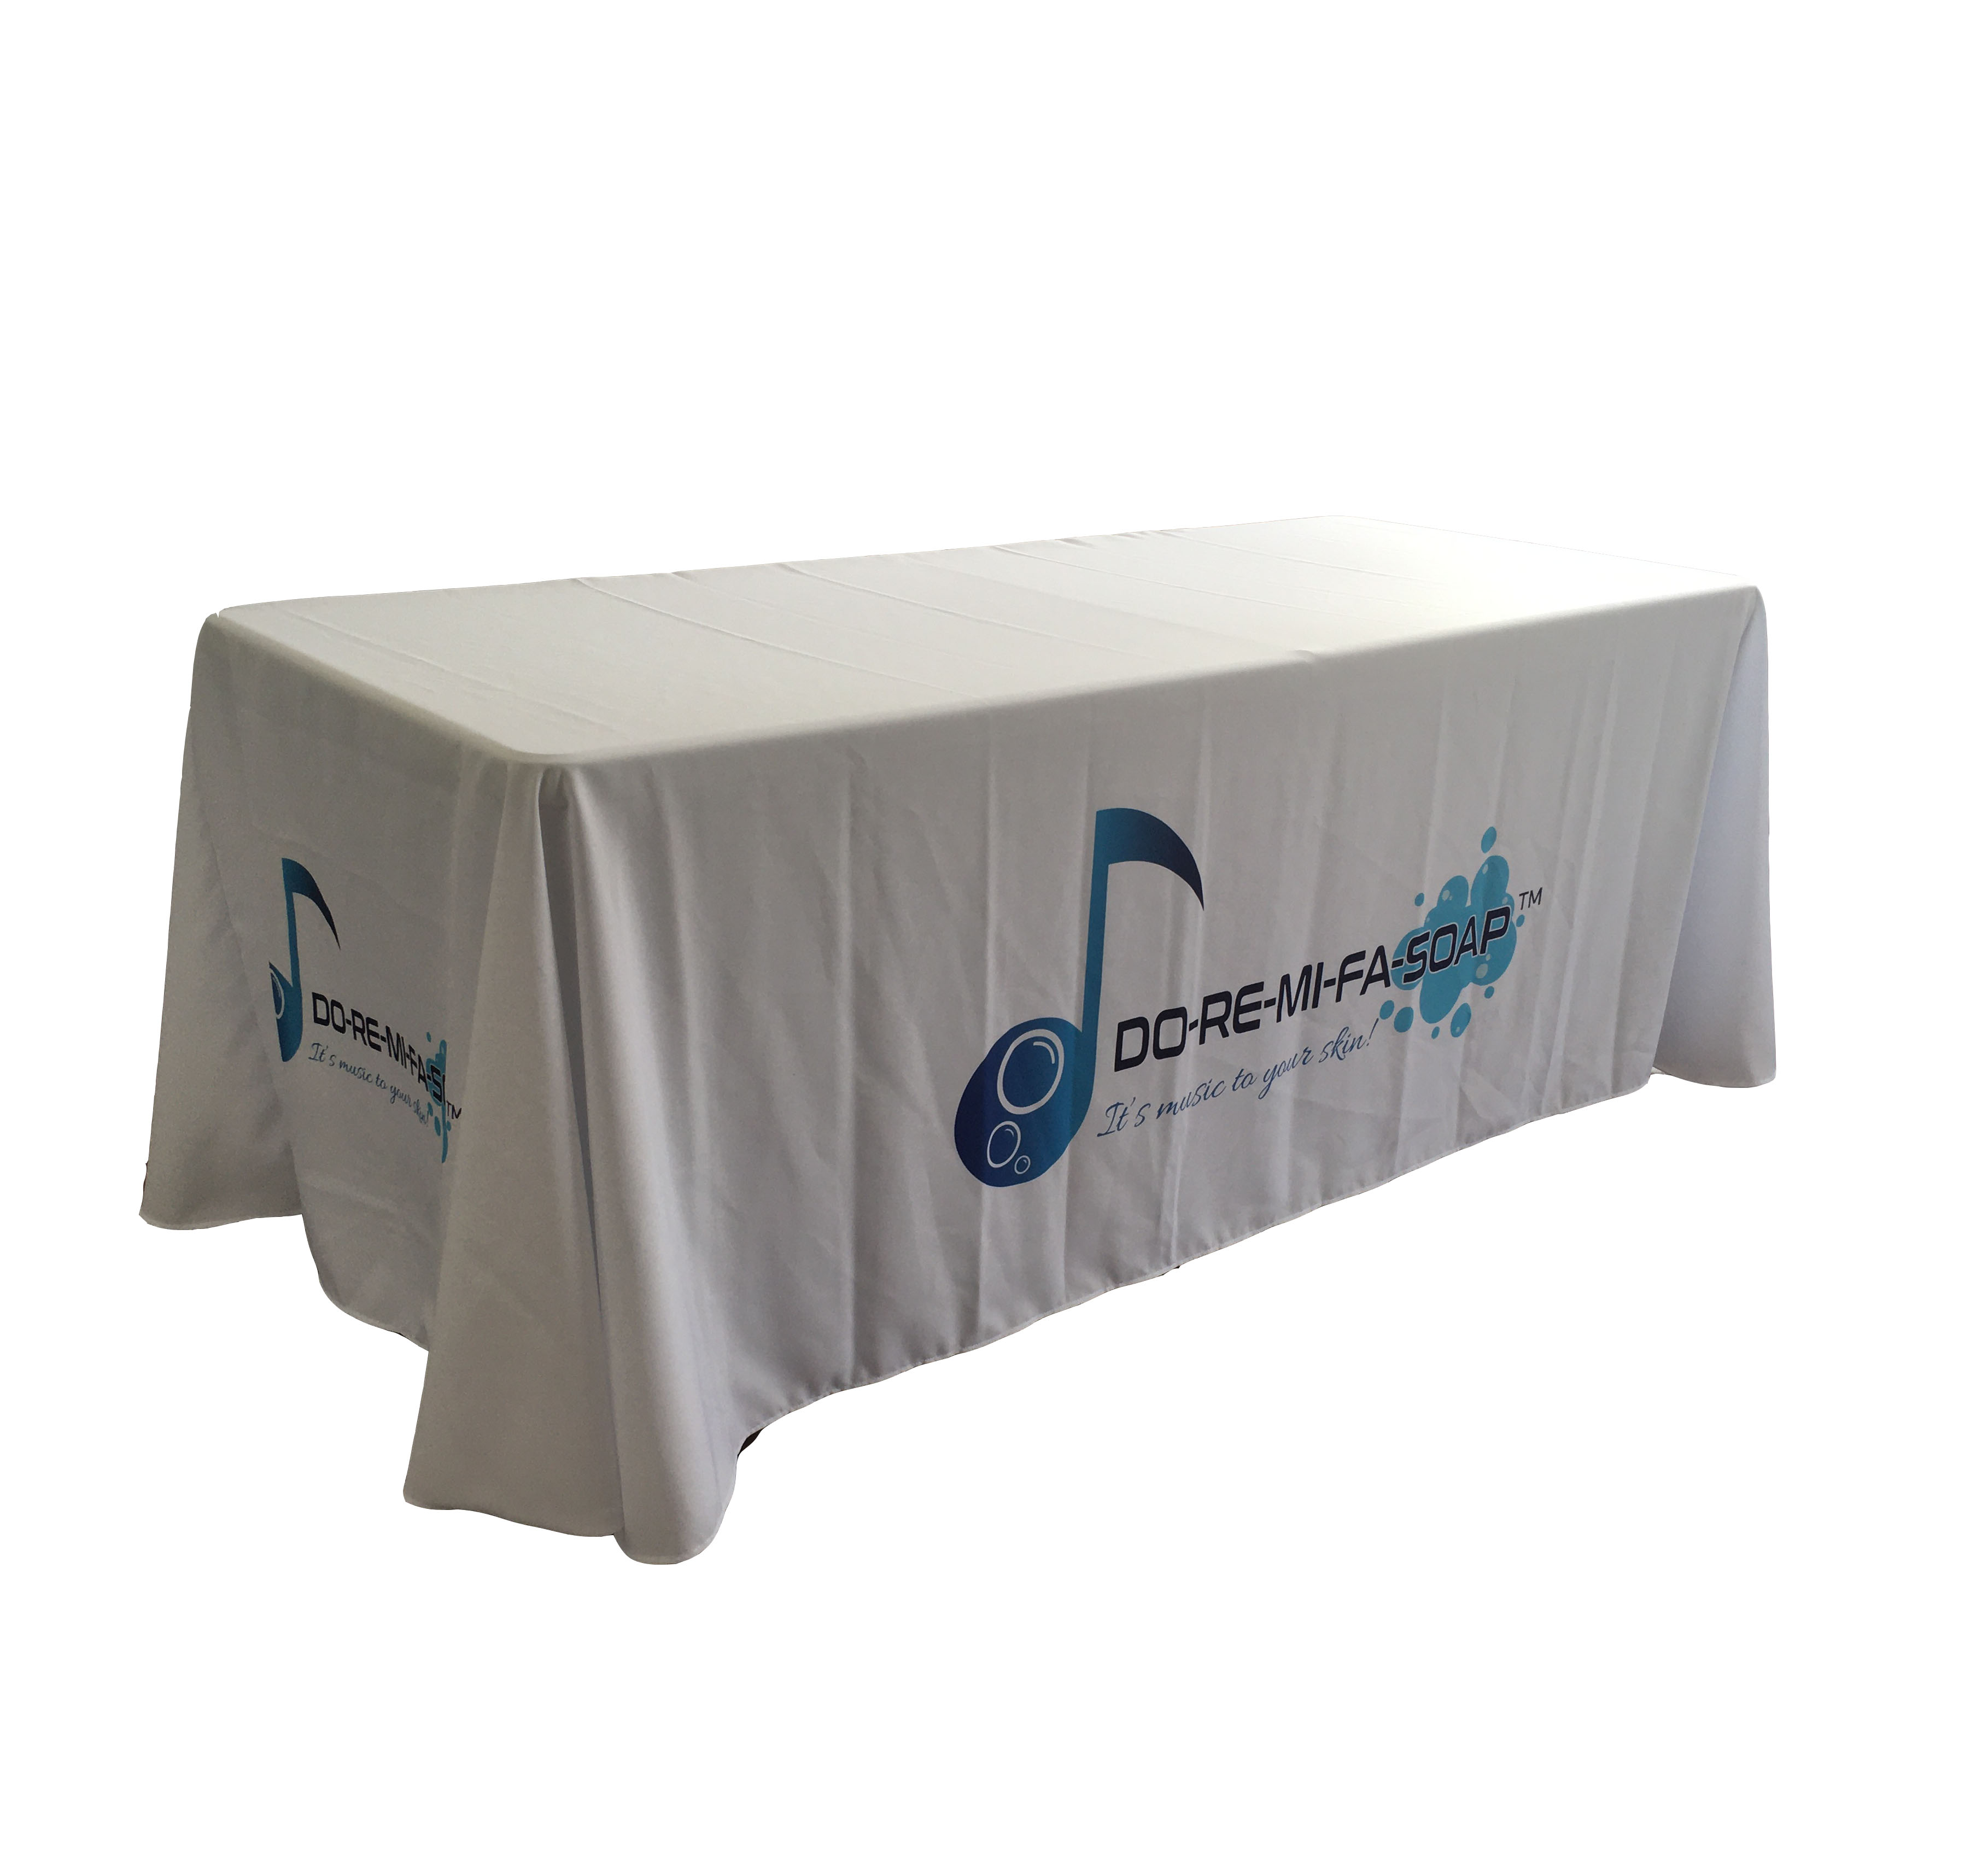 6FT Custom Logo Fabric Table Cloth Commercial Usage Table Cover